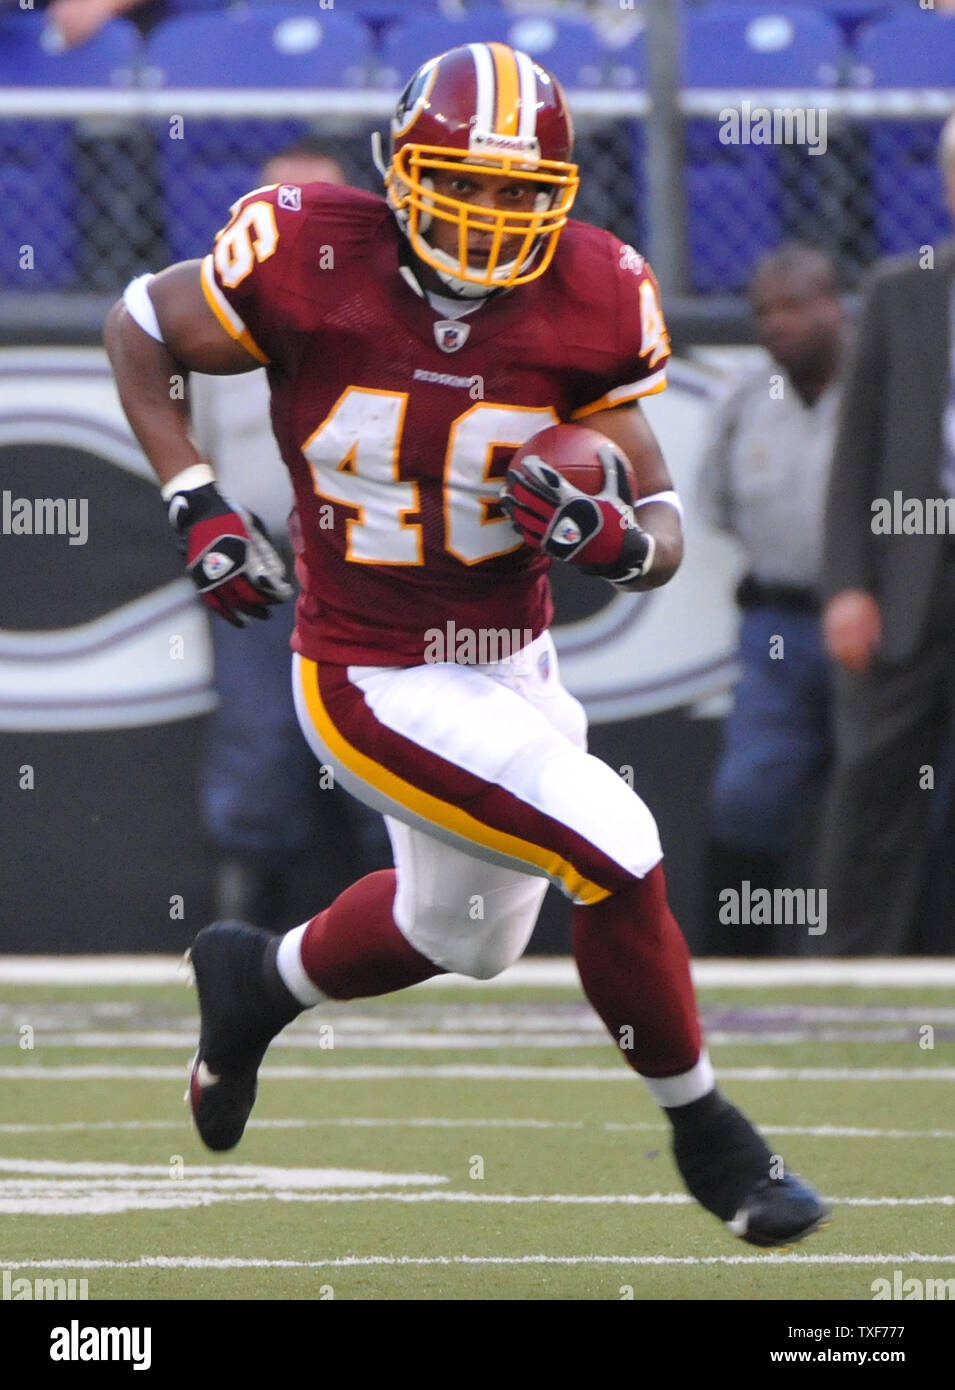 Fail: Redskins' Ladell Betts has name misspelled on back of jersey